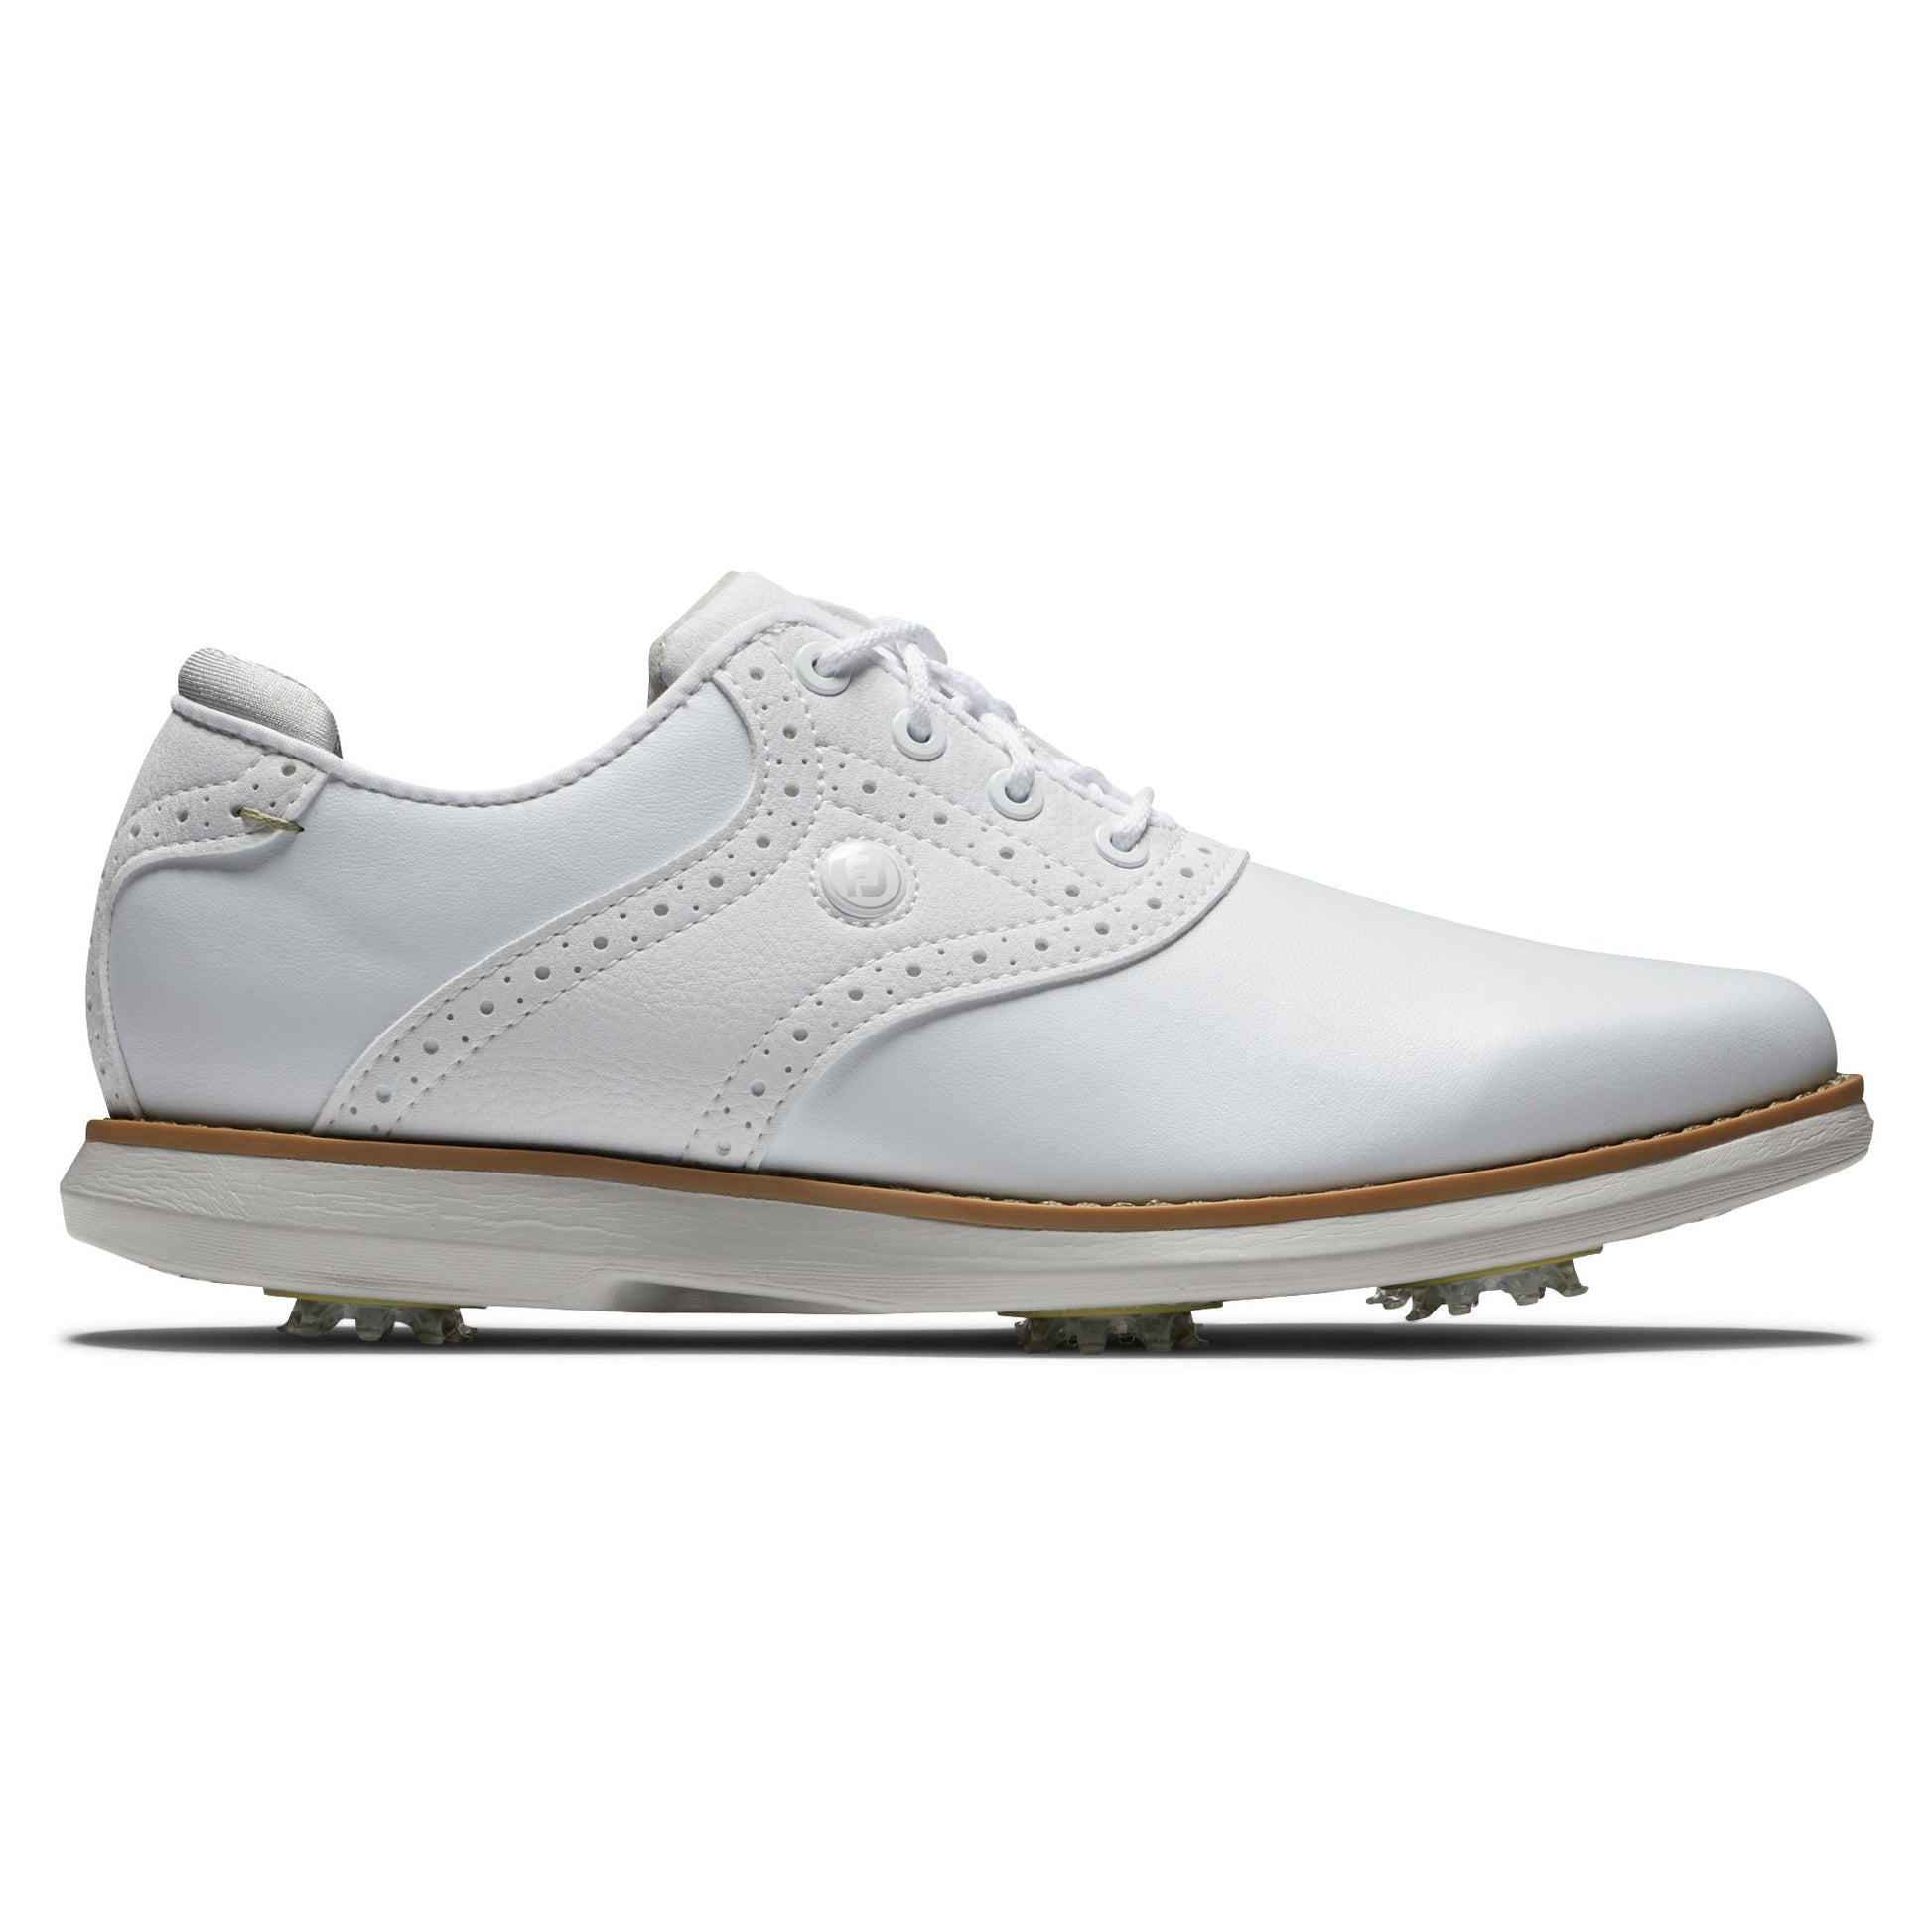 FootJoy Ladies Traditions Waterproof Golf Shoe in White with Softspikes